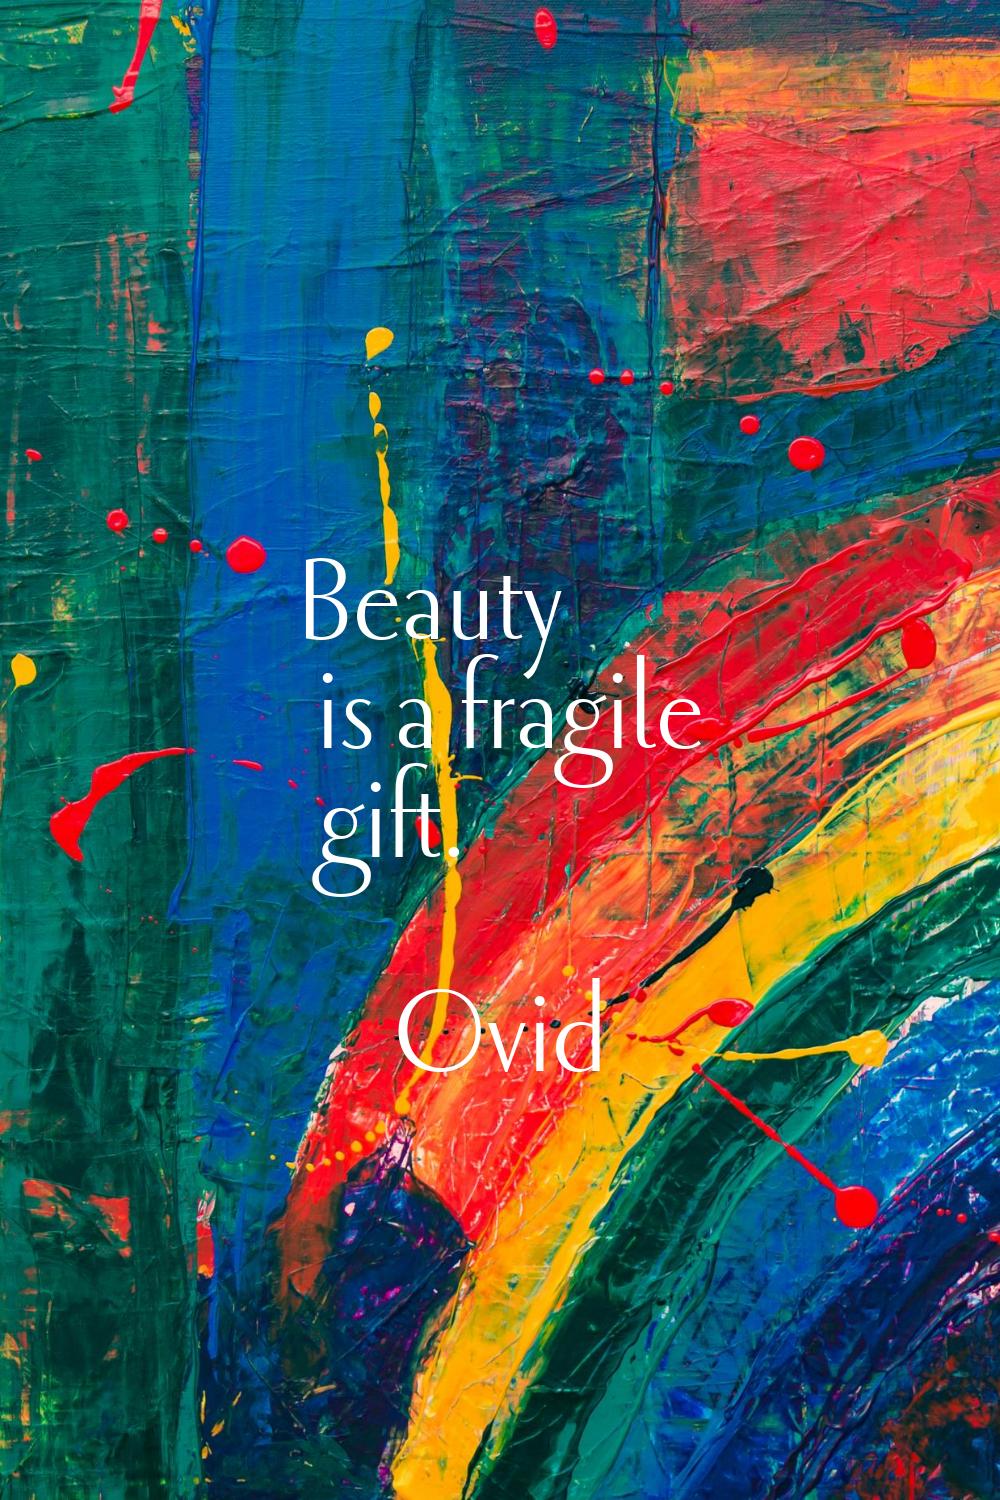 Beauty is a fragile gift.